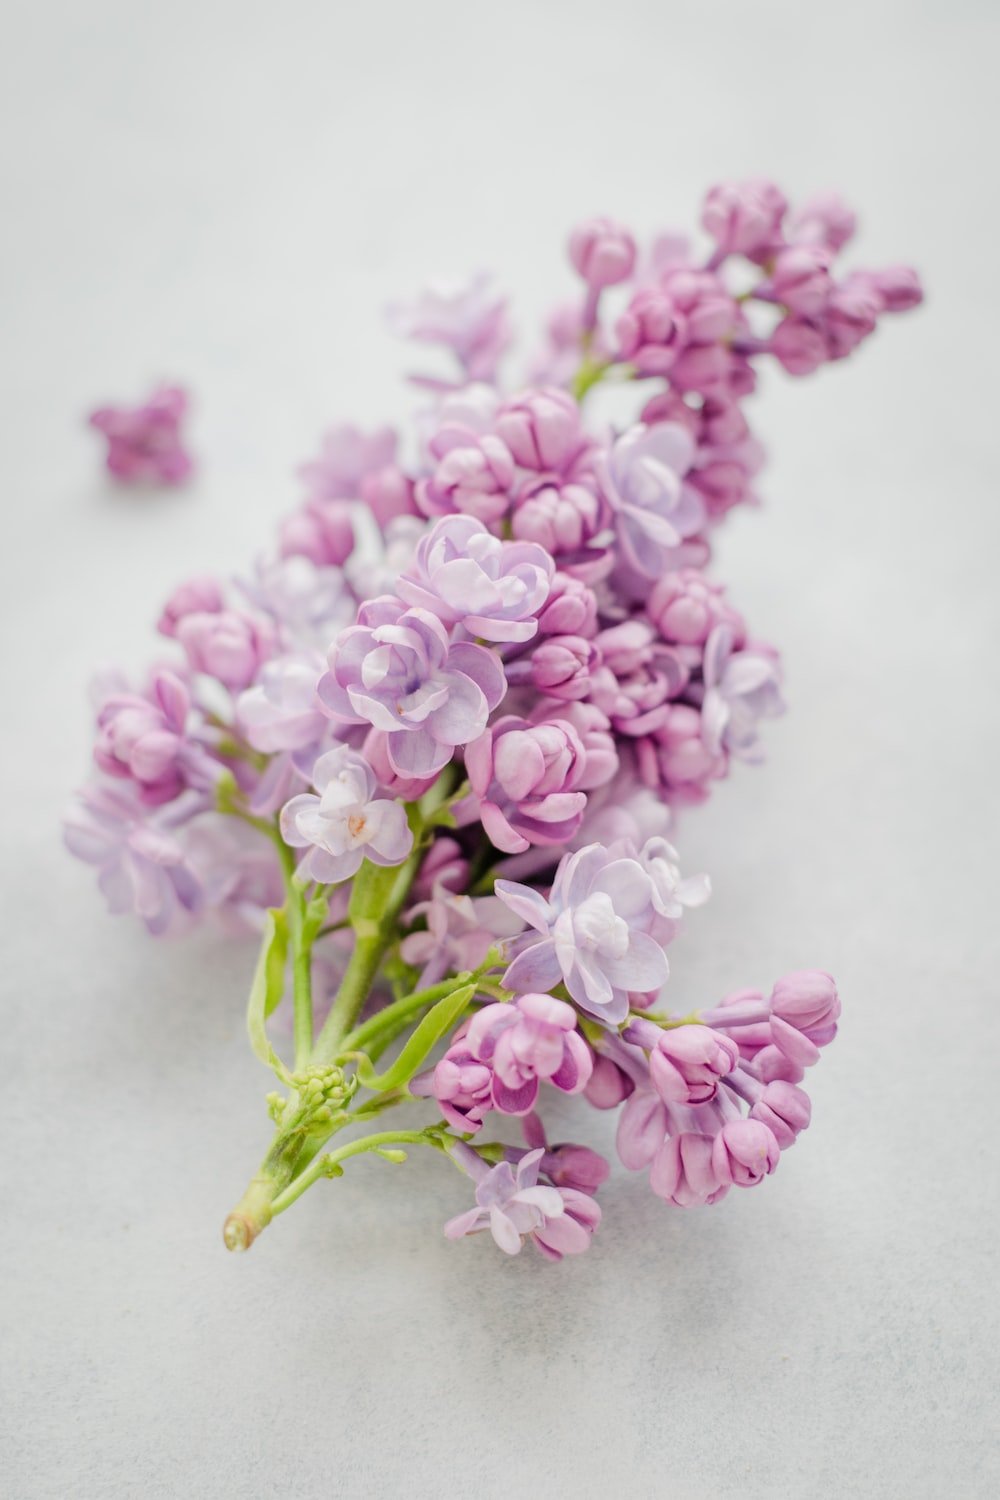 Lilacs Picture. Download Free Image